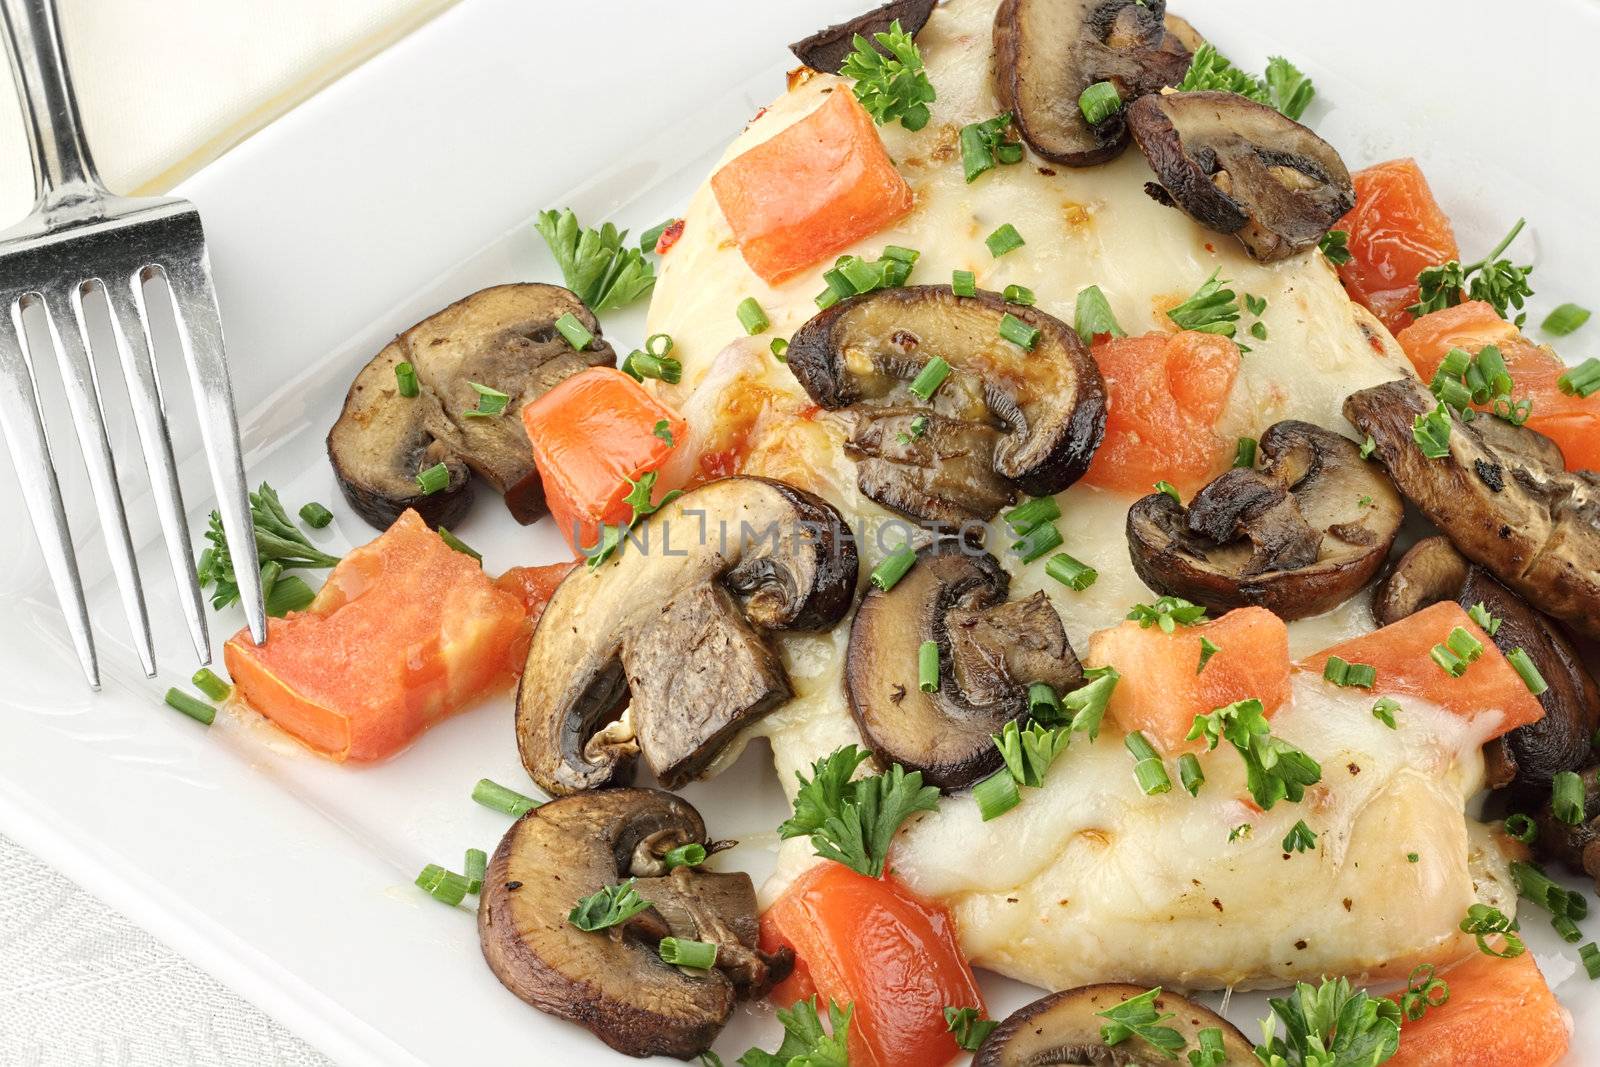 Chicken baked with baby portabella mushrooms, tomatoes, and mozzarella cheese. Garnished with chives and parsley.